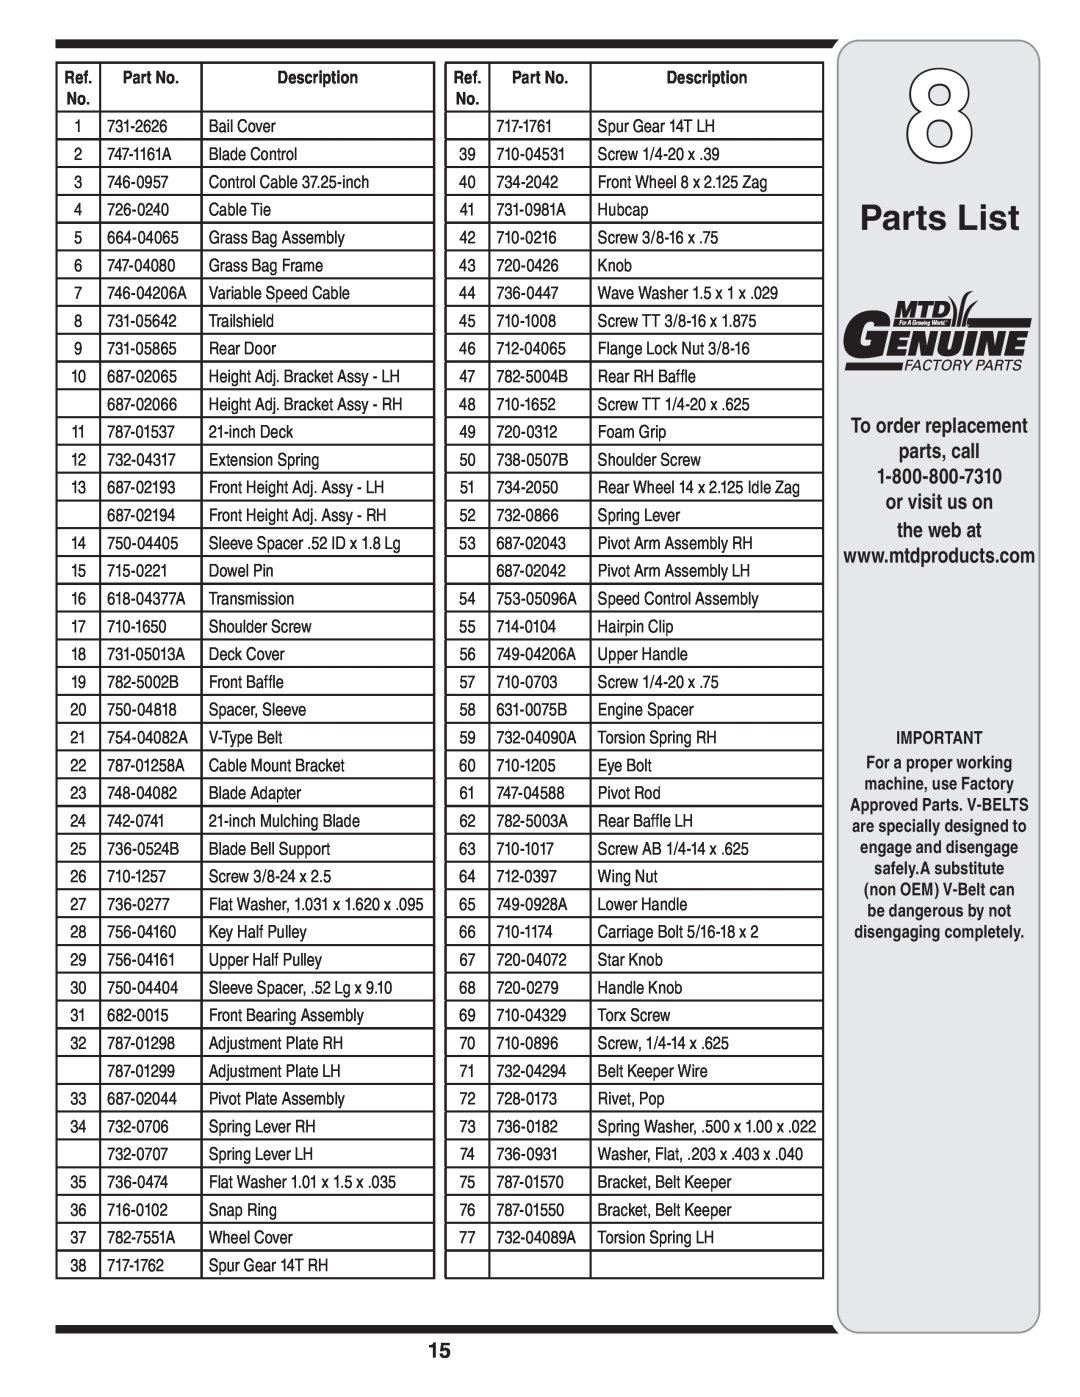 Honda Power Equipment V550 warranty Parts List, To order replacement parts, call, or visit us on the web at, Description 